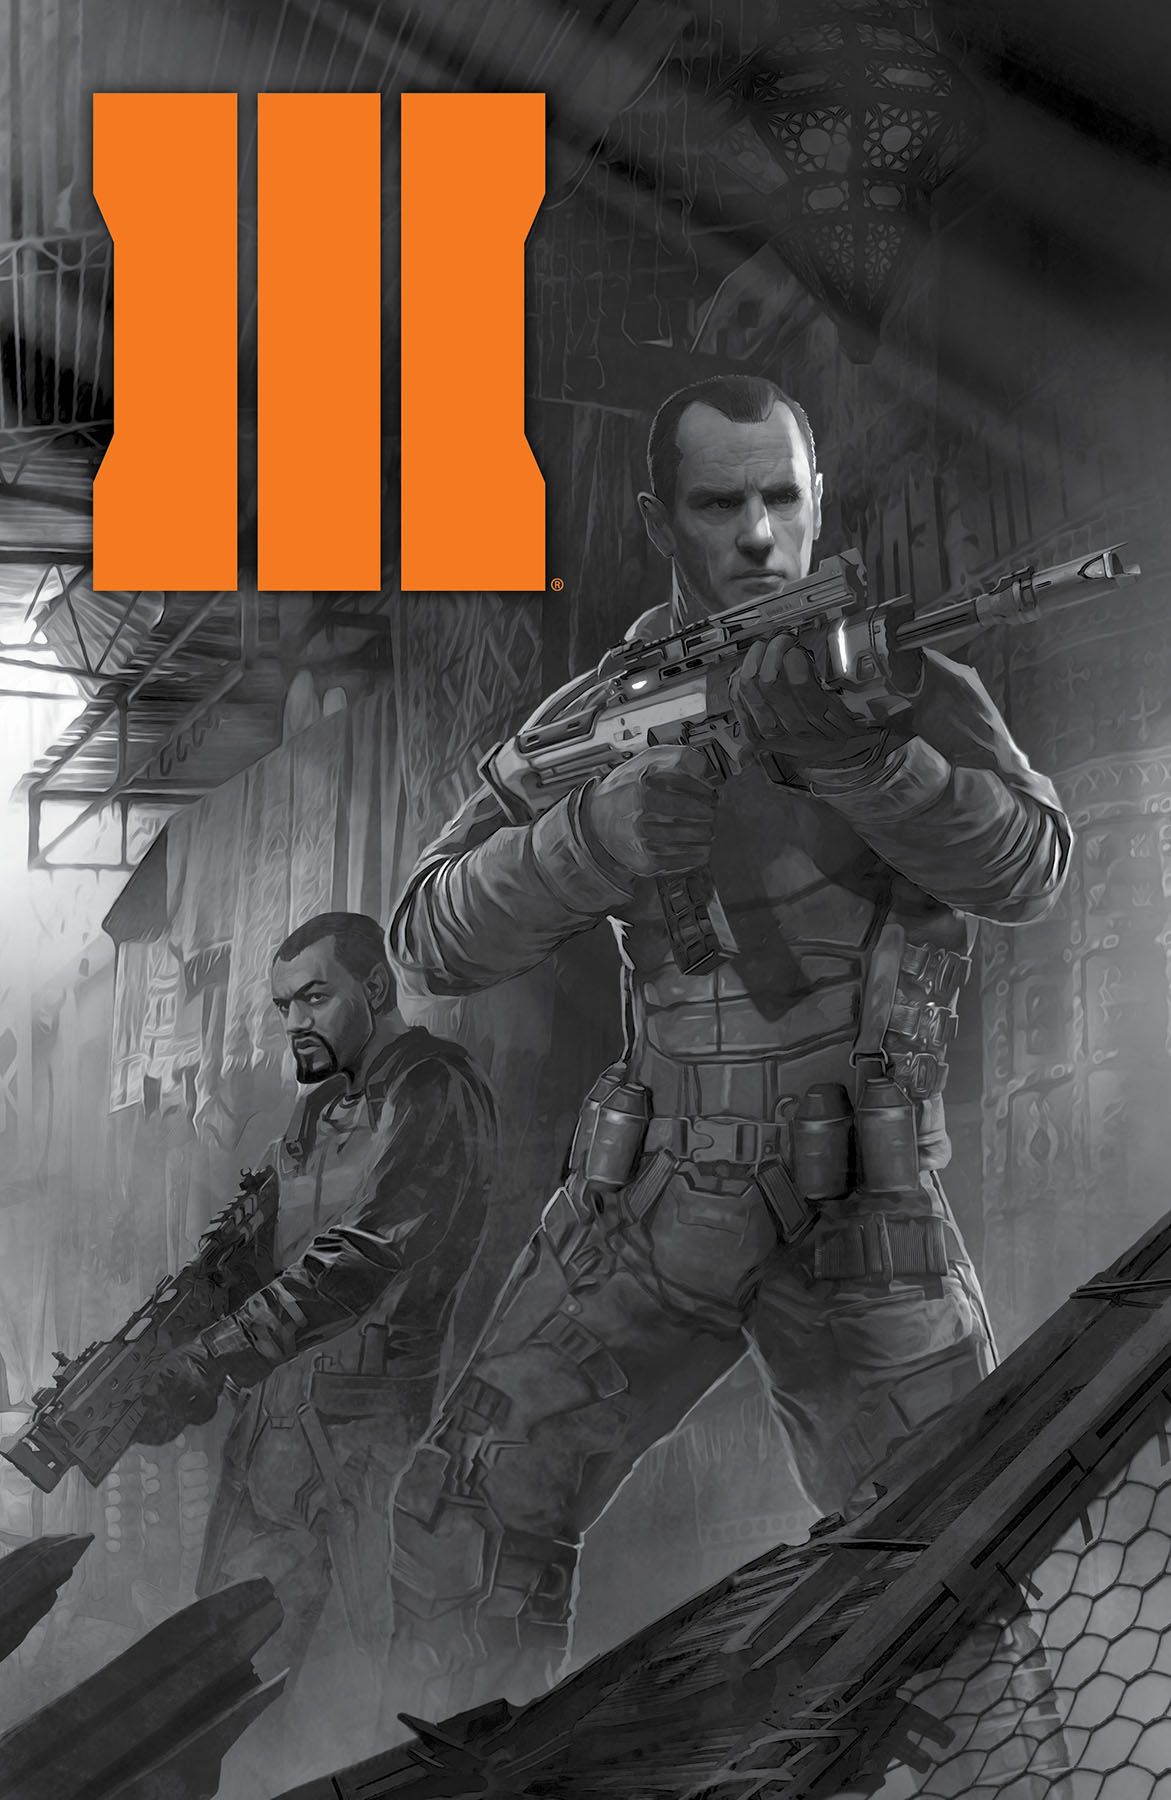 CALL OF DUTY BLACK OPS III #1 (OF 6) (2ND PTG)